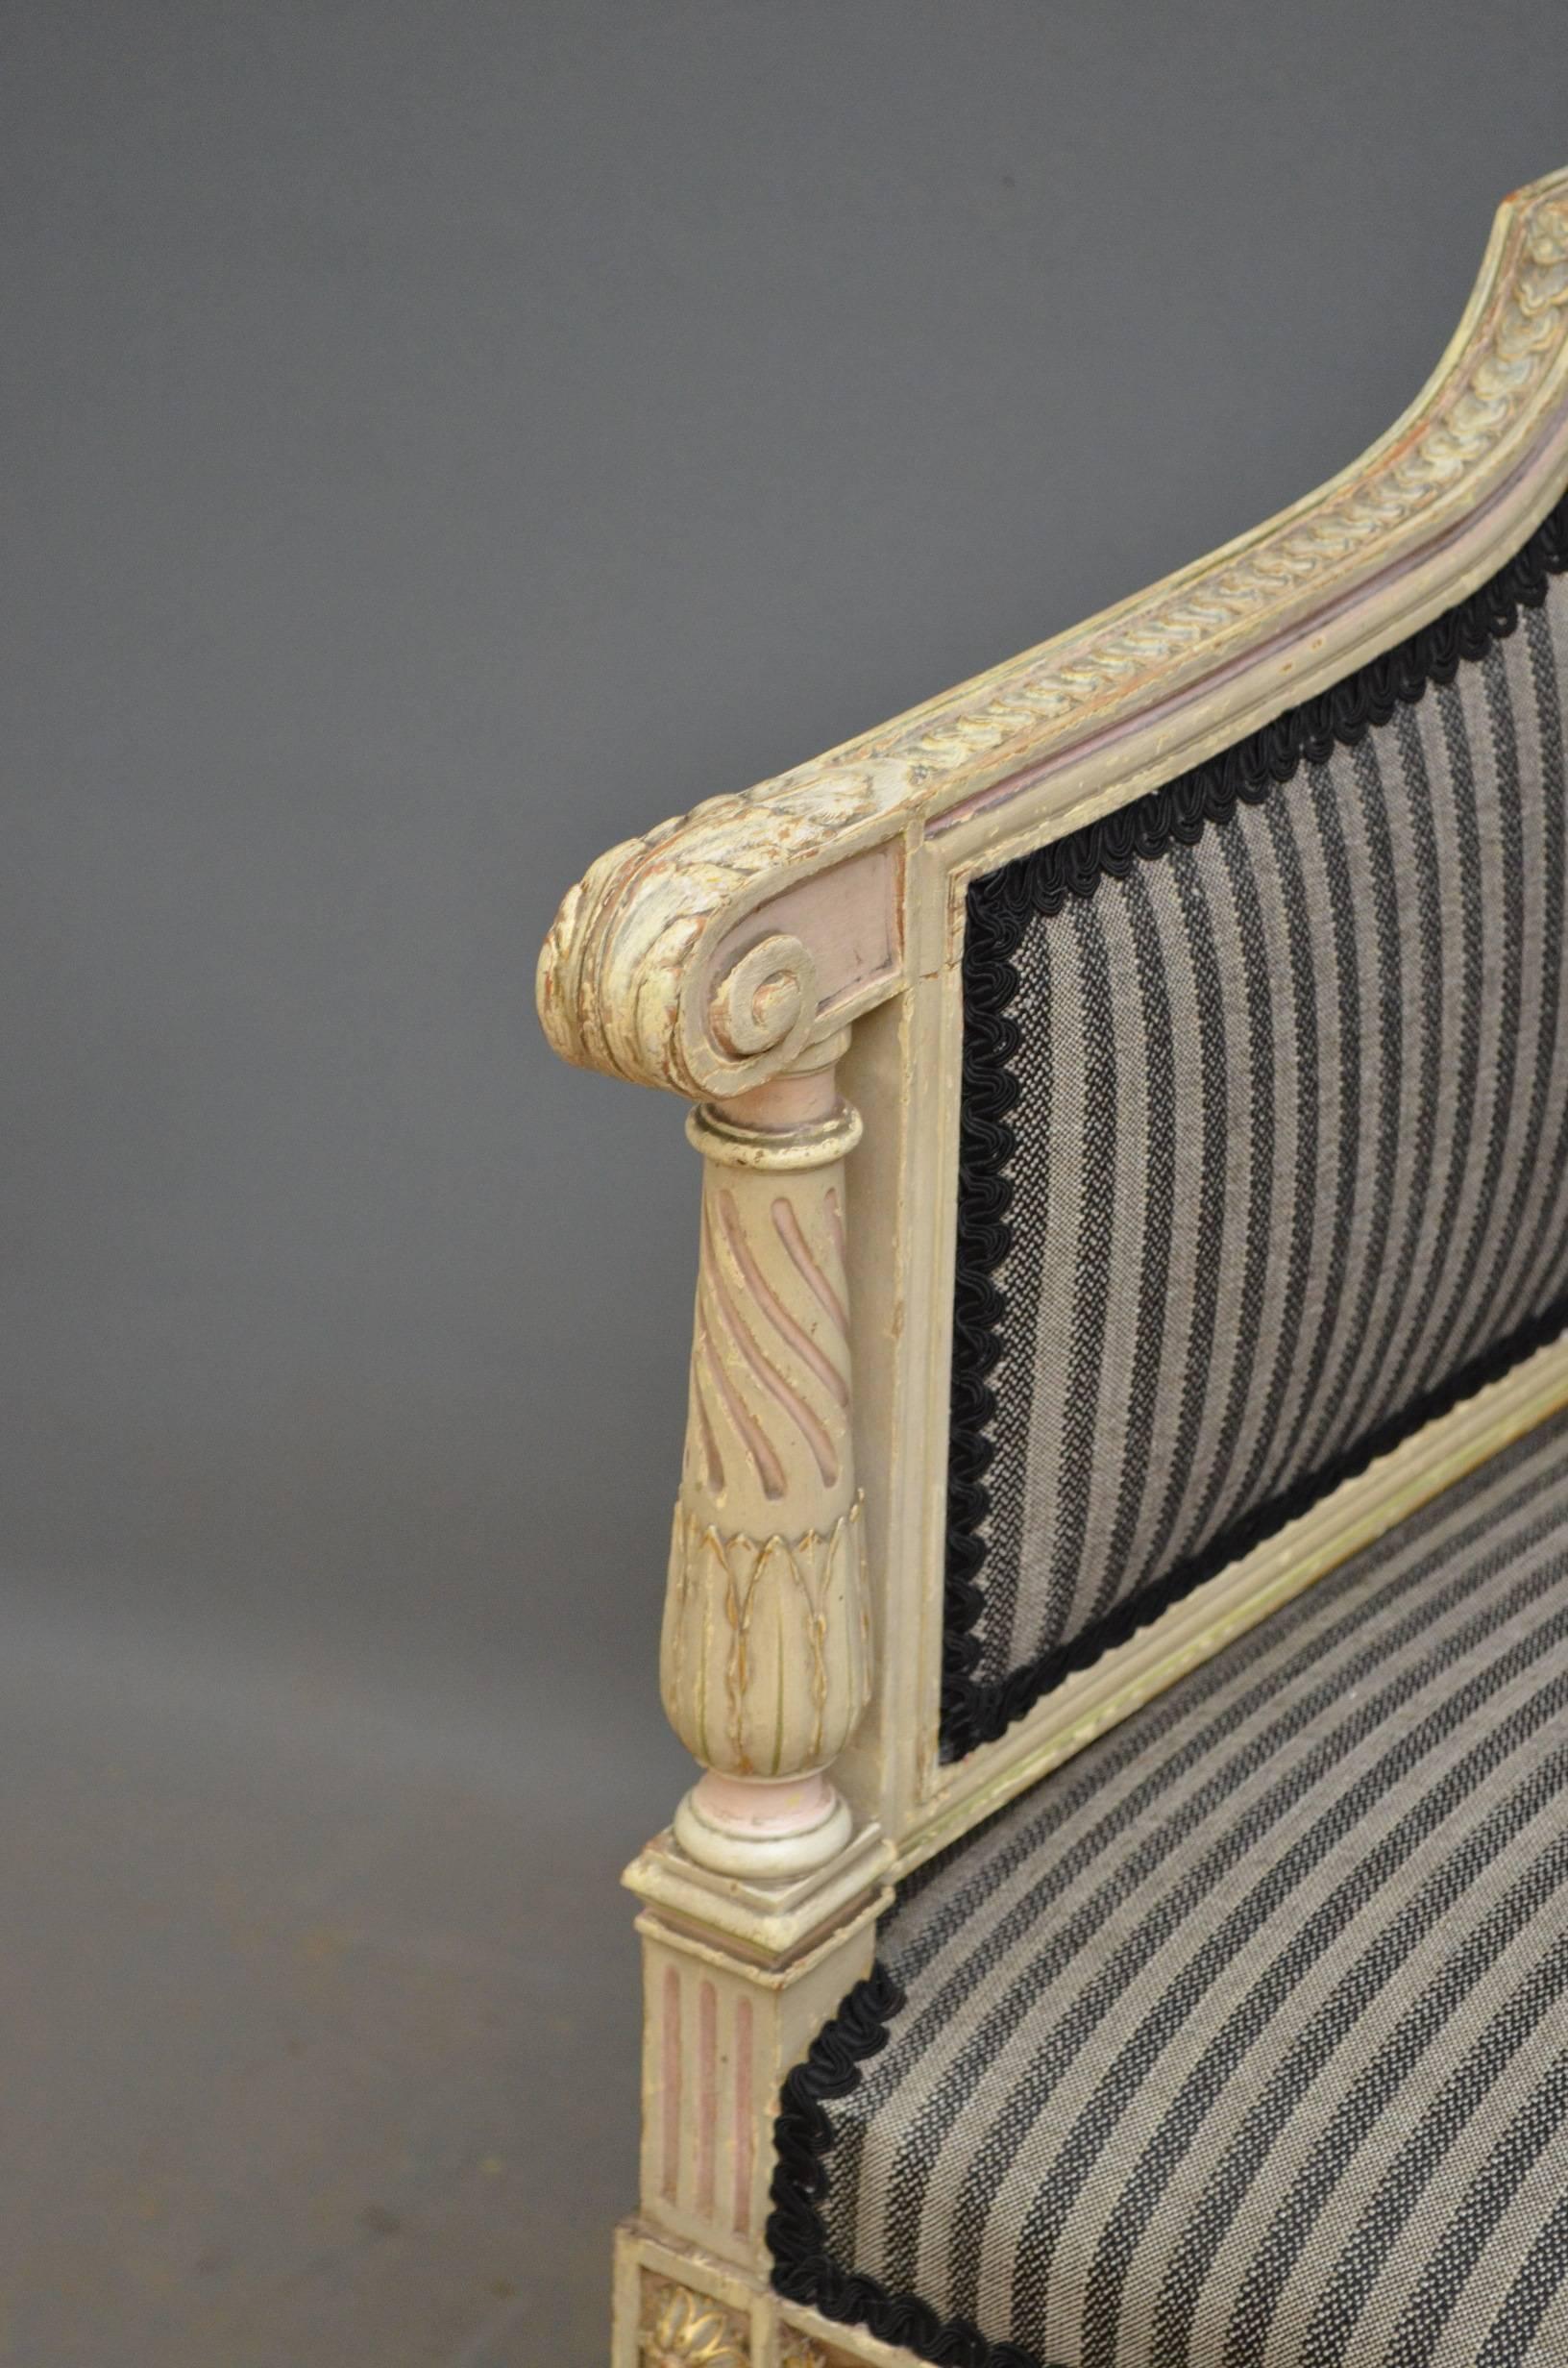 Sn3785, very attractive Louise XVI revival armchair, having moulded cresting top rail, foliate arms and patera bosses in gilt, all standing on spirally fluted legs. This wonderful Victorian chair retains its original paintwork and gilt, circa